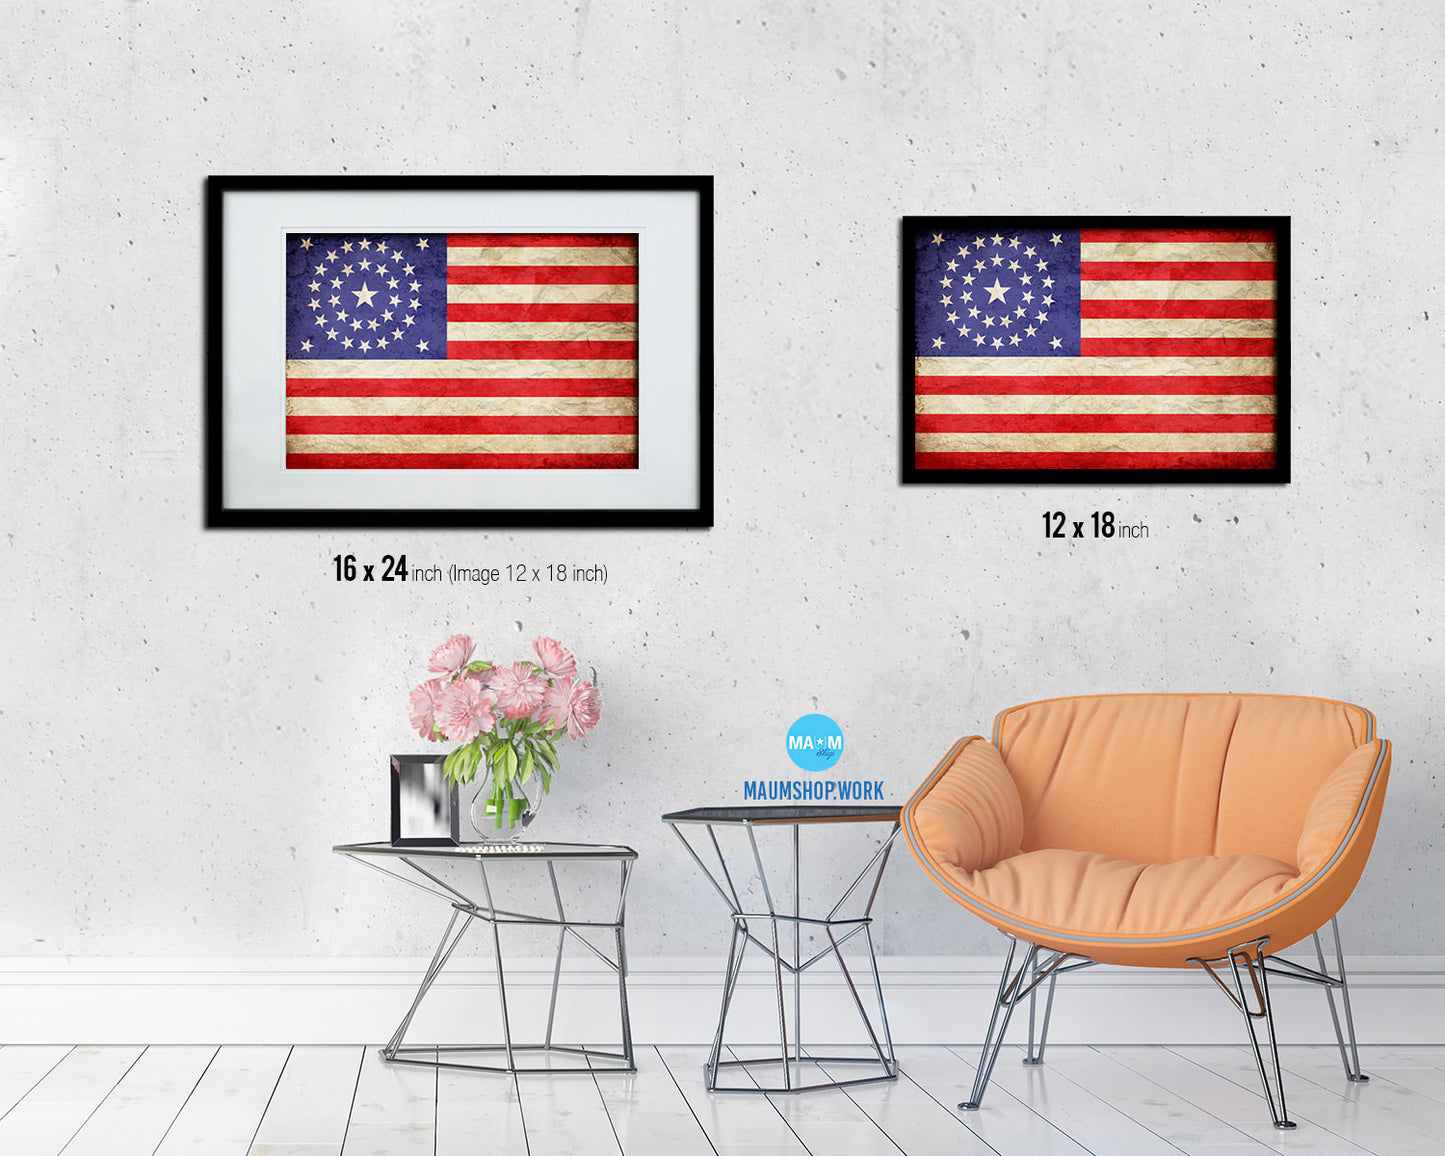 34 Stars Lincoln and Johnson Vintage Military Flag Framed Print Sign Decor Wall Art Gifts